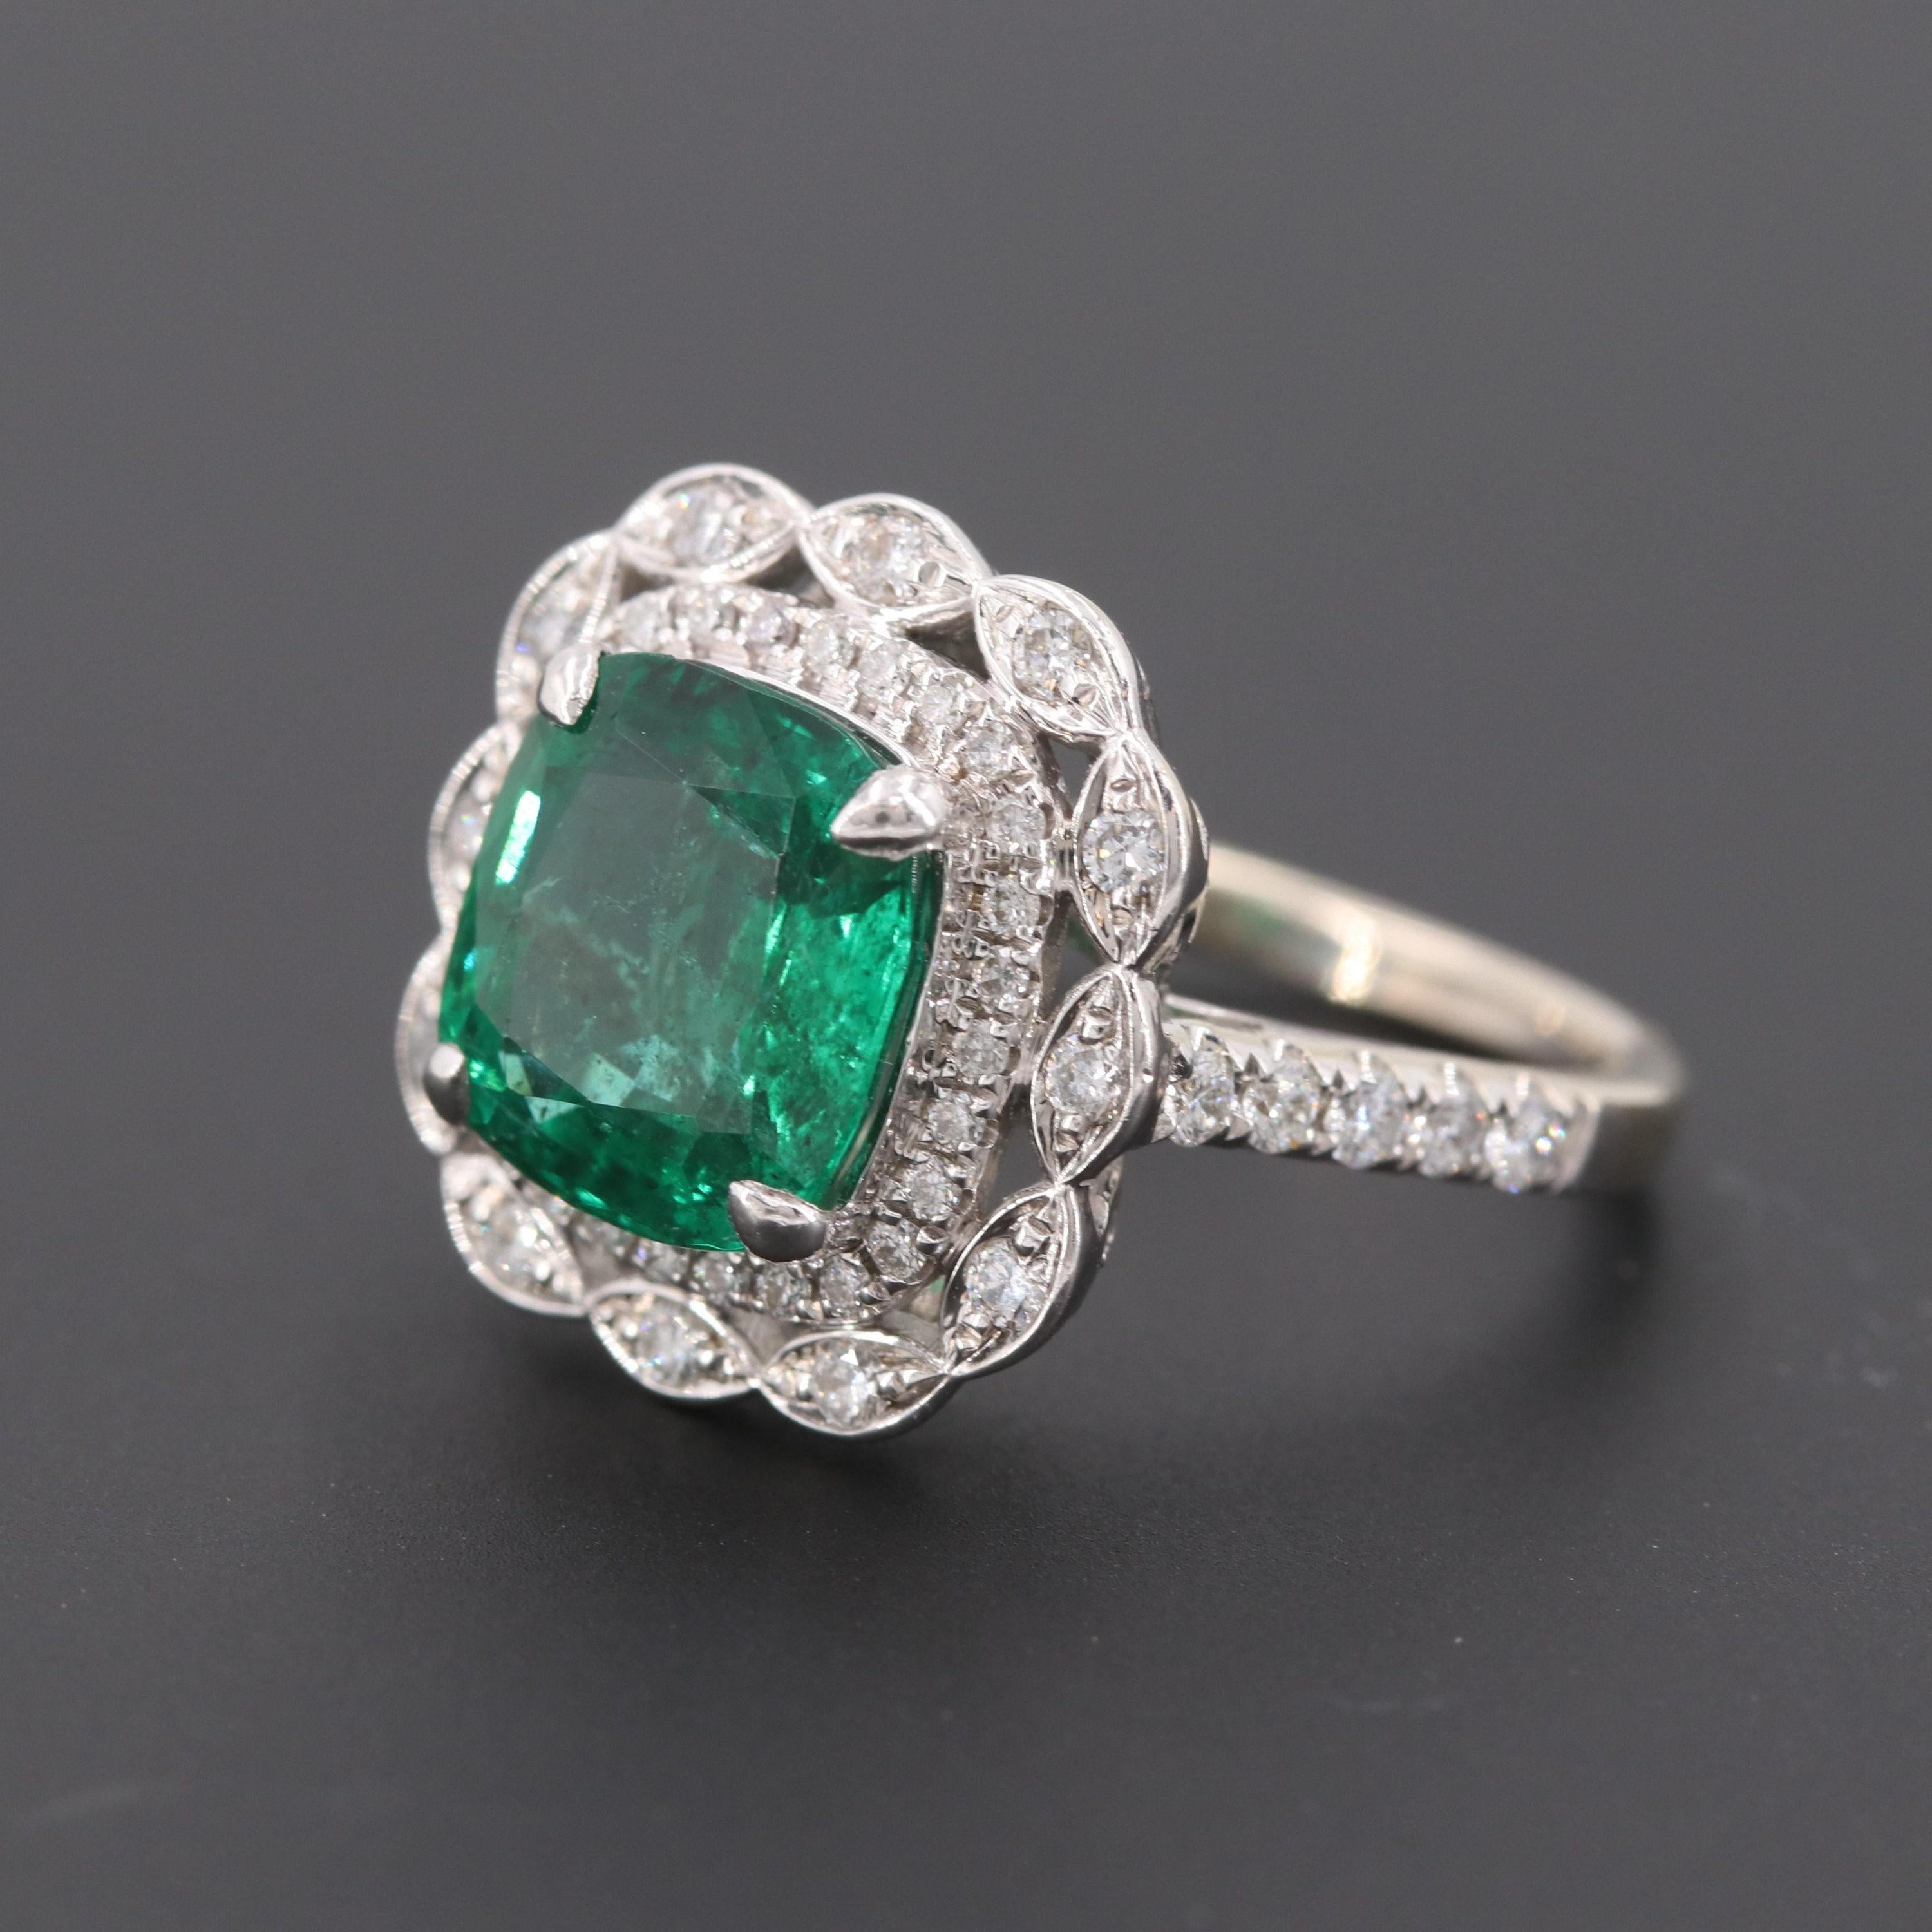 For Sale:  Art Deco 2 CT Natural Cushion Cut Emerald Engagement Ring, Diamond Cocktail Ring 4